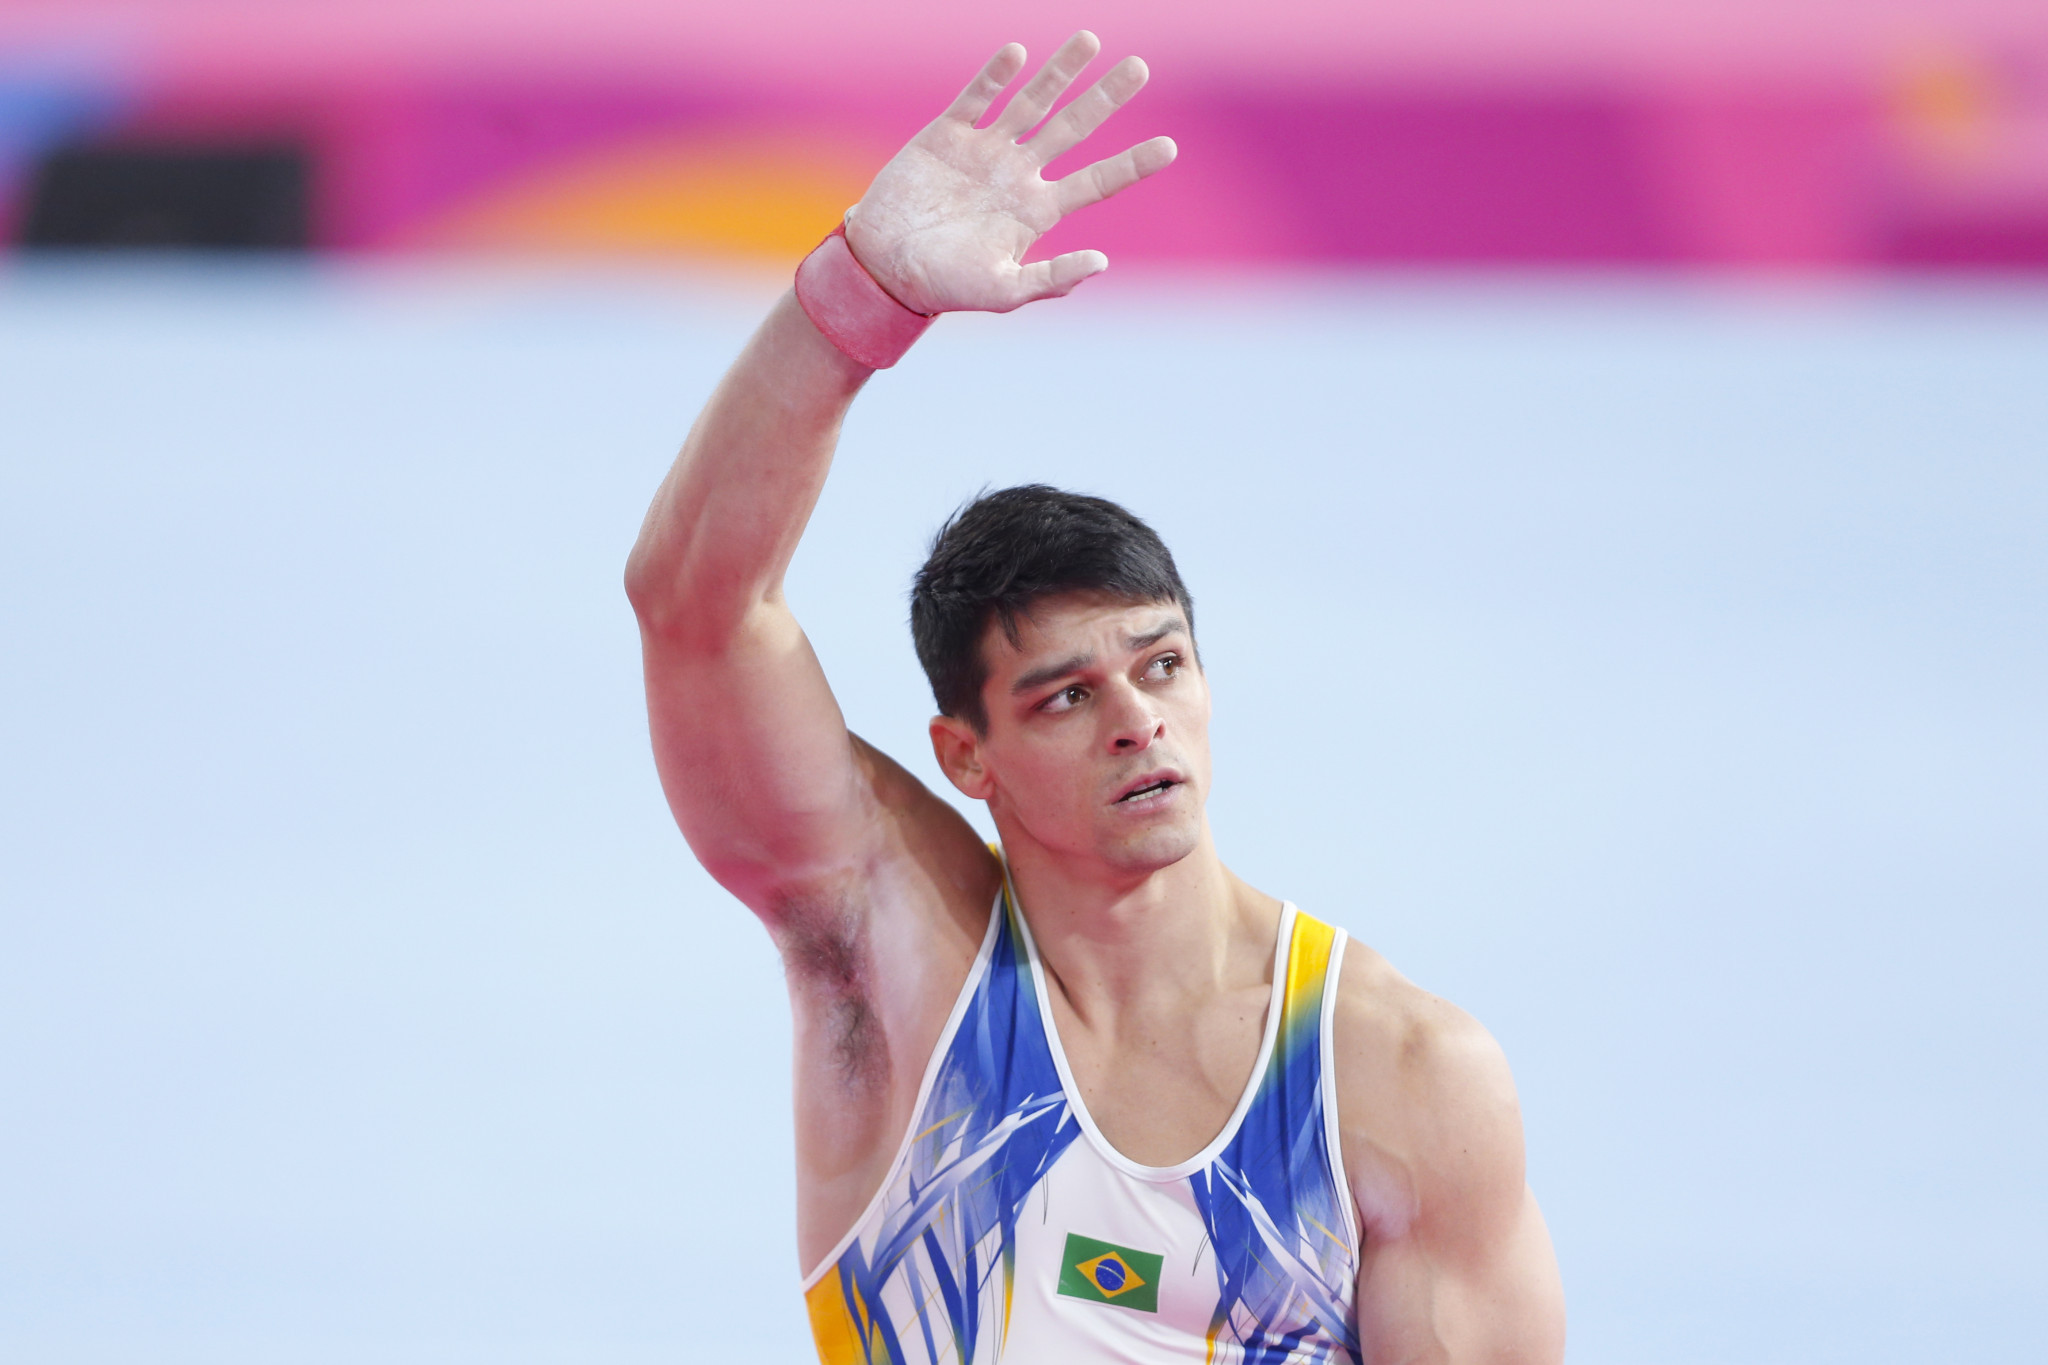 Brazil had more success in gymnastics, with Francisco Carlos Barretto triumphing on the pommel horse ©Lima 2019